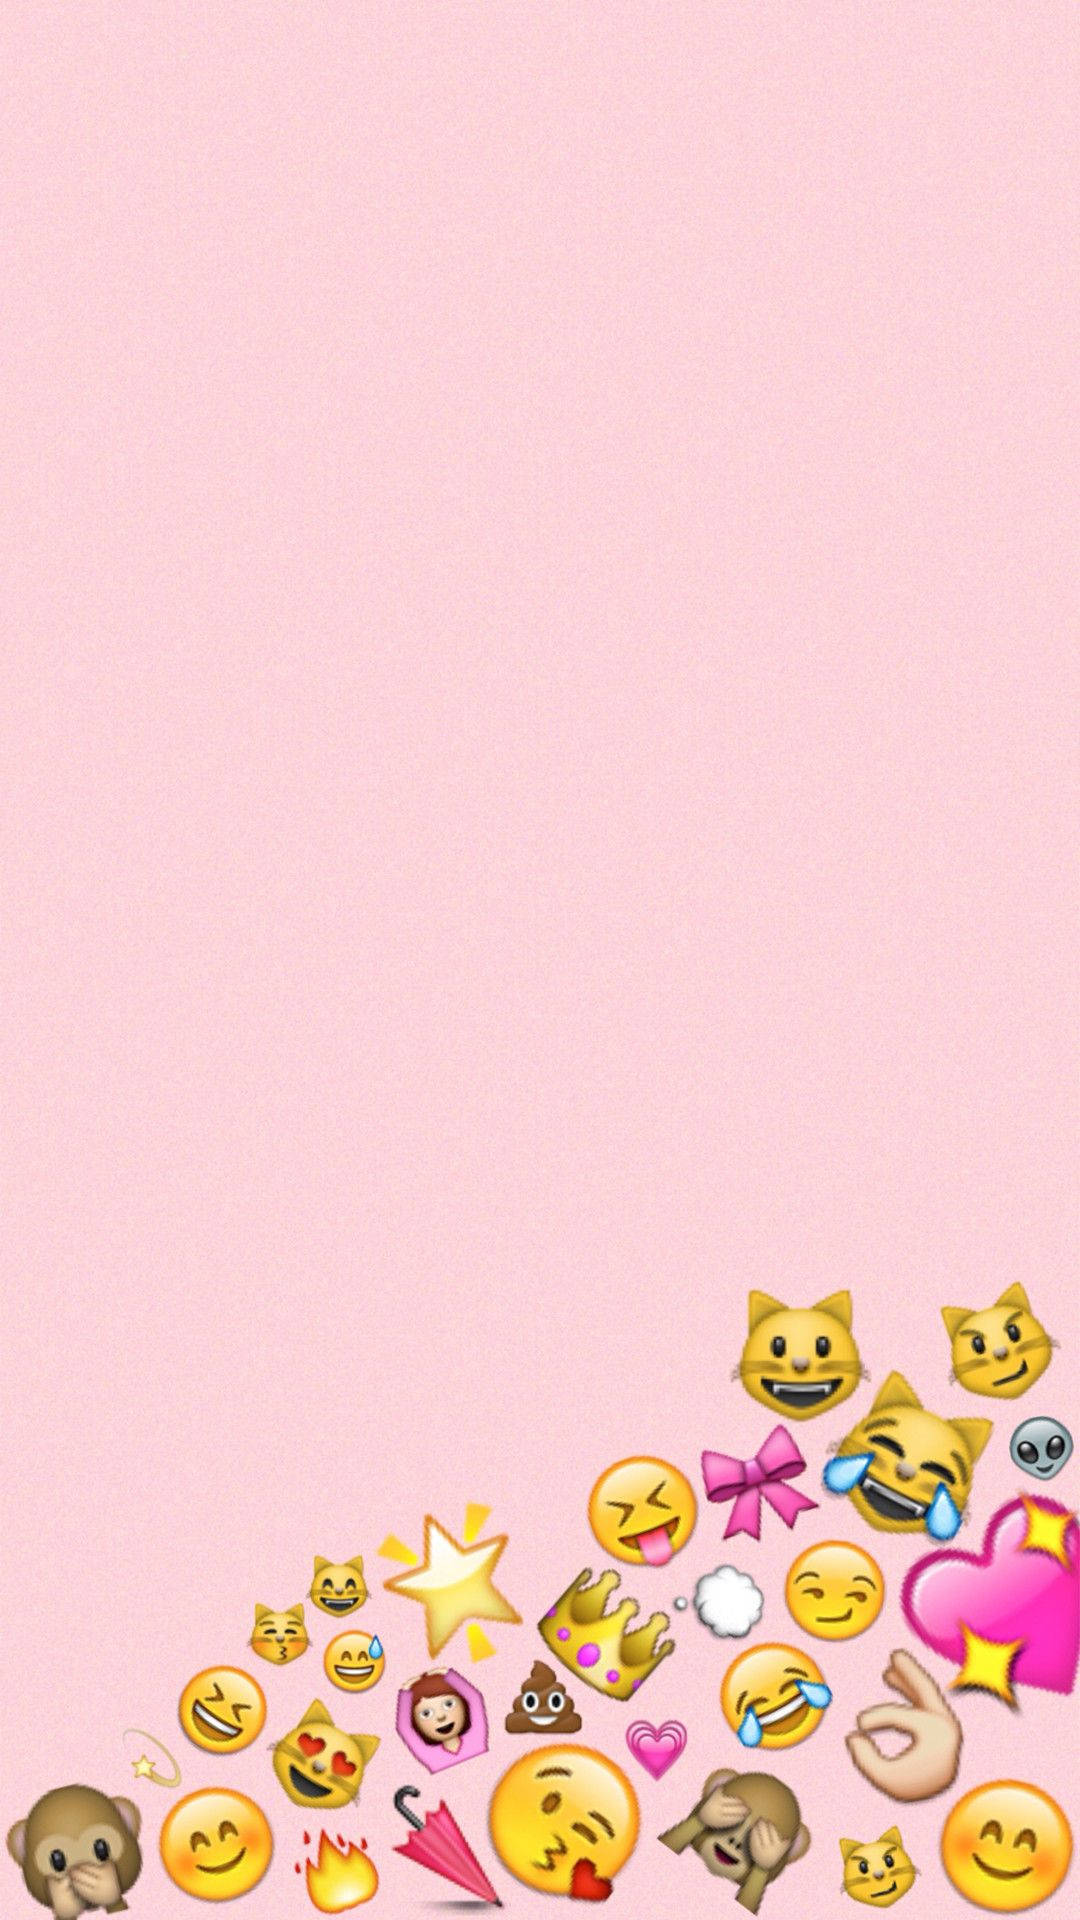 Express Yourself With Cute Girly Emojis Background